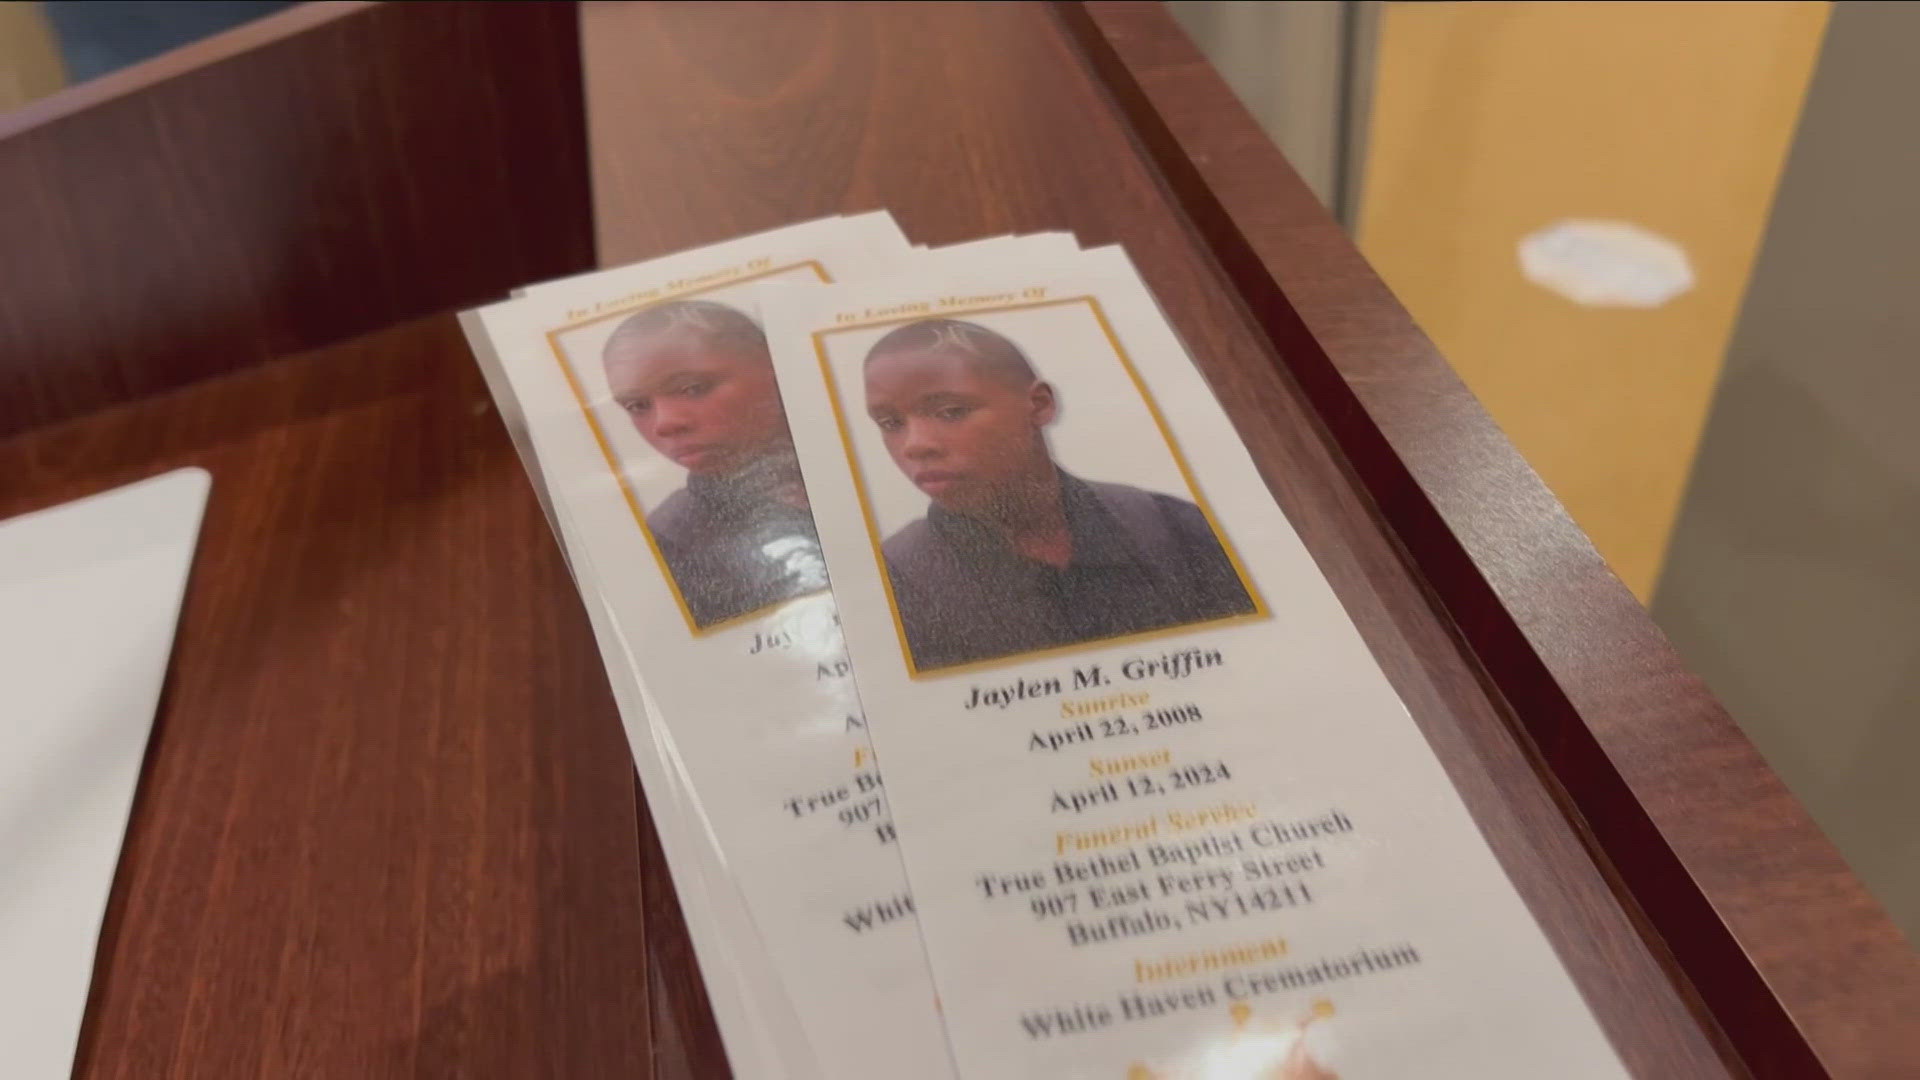 Family of Jaylen Griffin held a funeral service following the discovery of his body 4-years after his disappearance